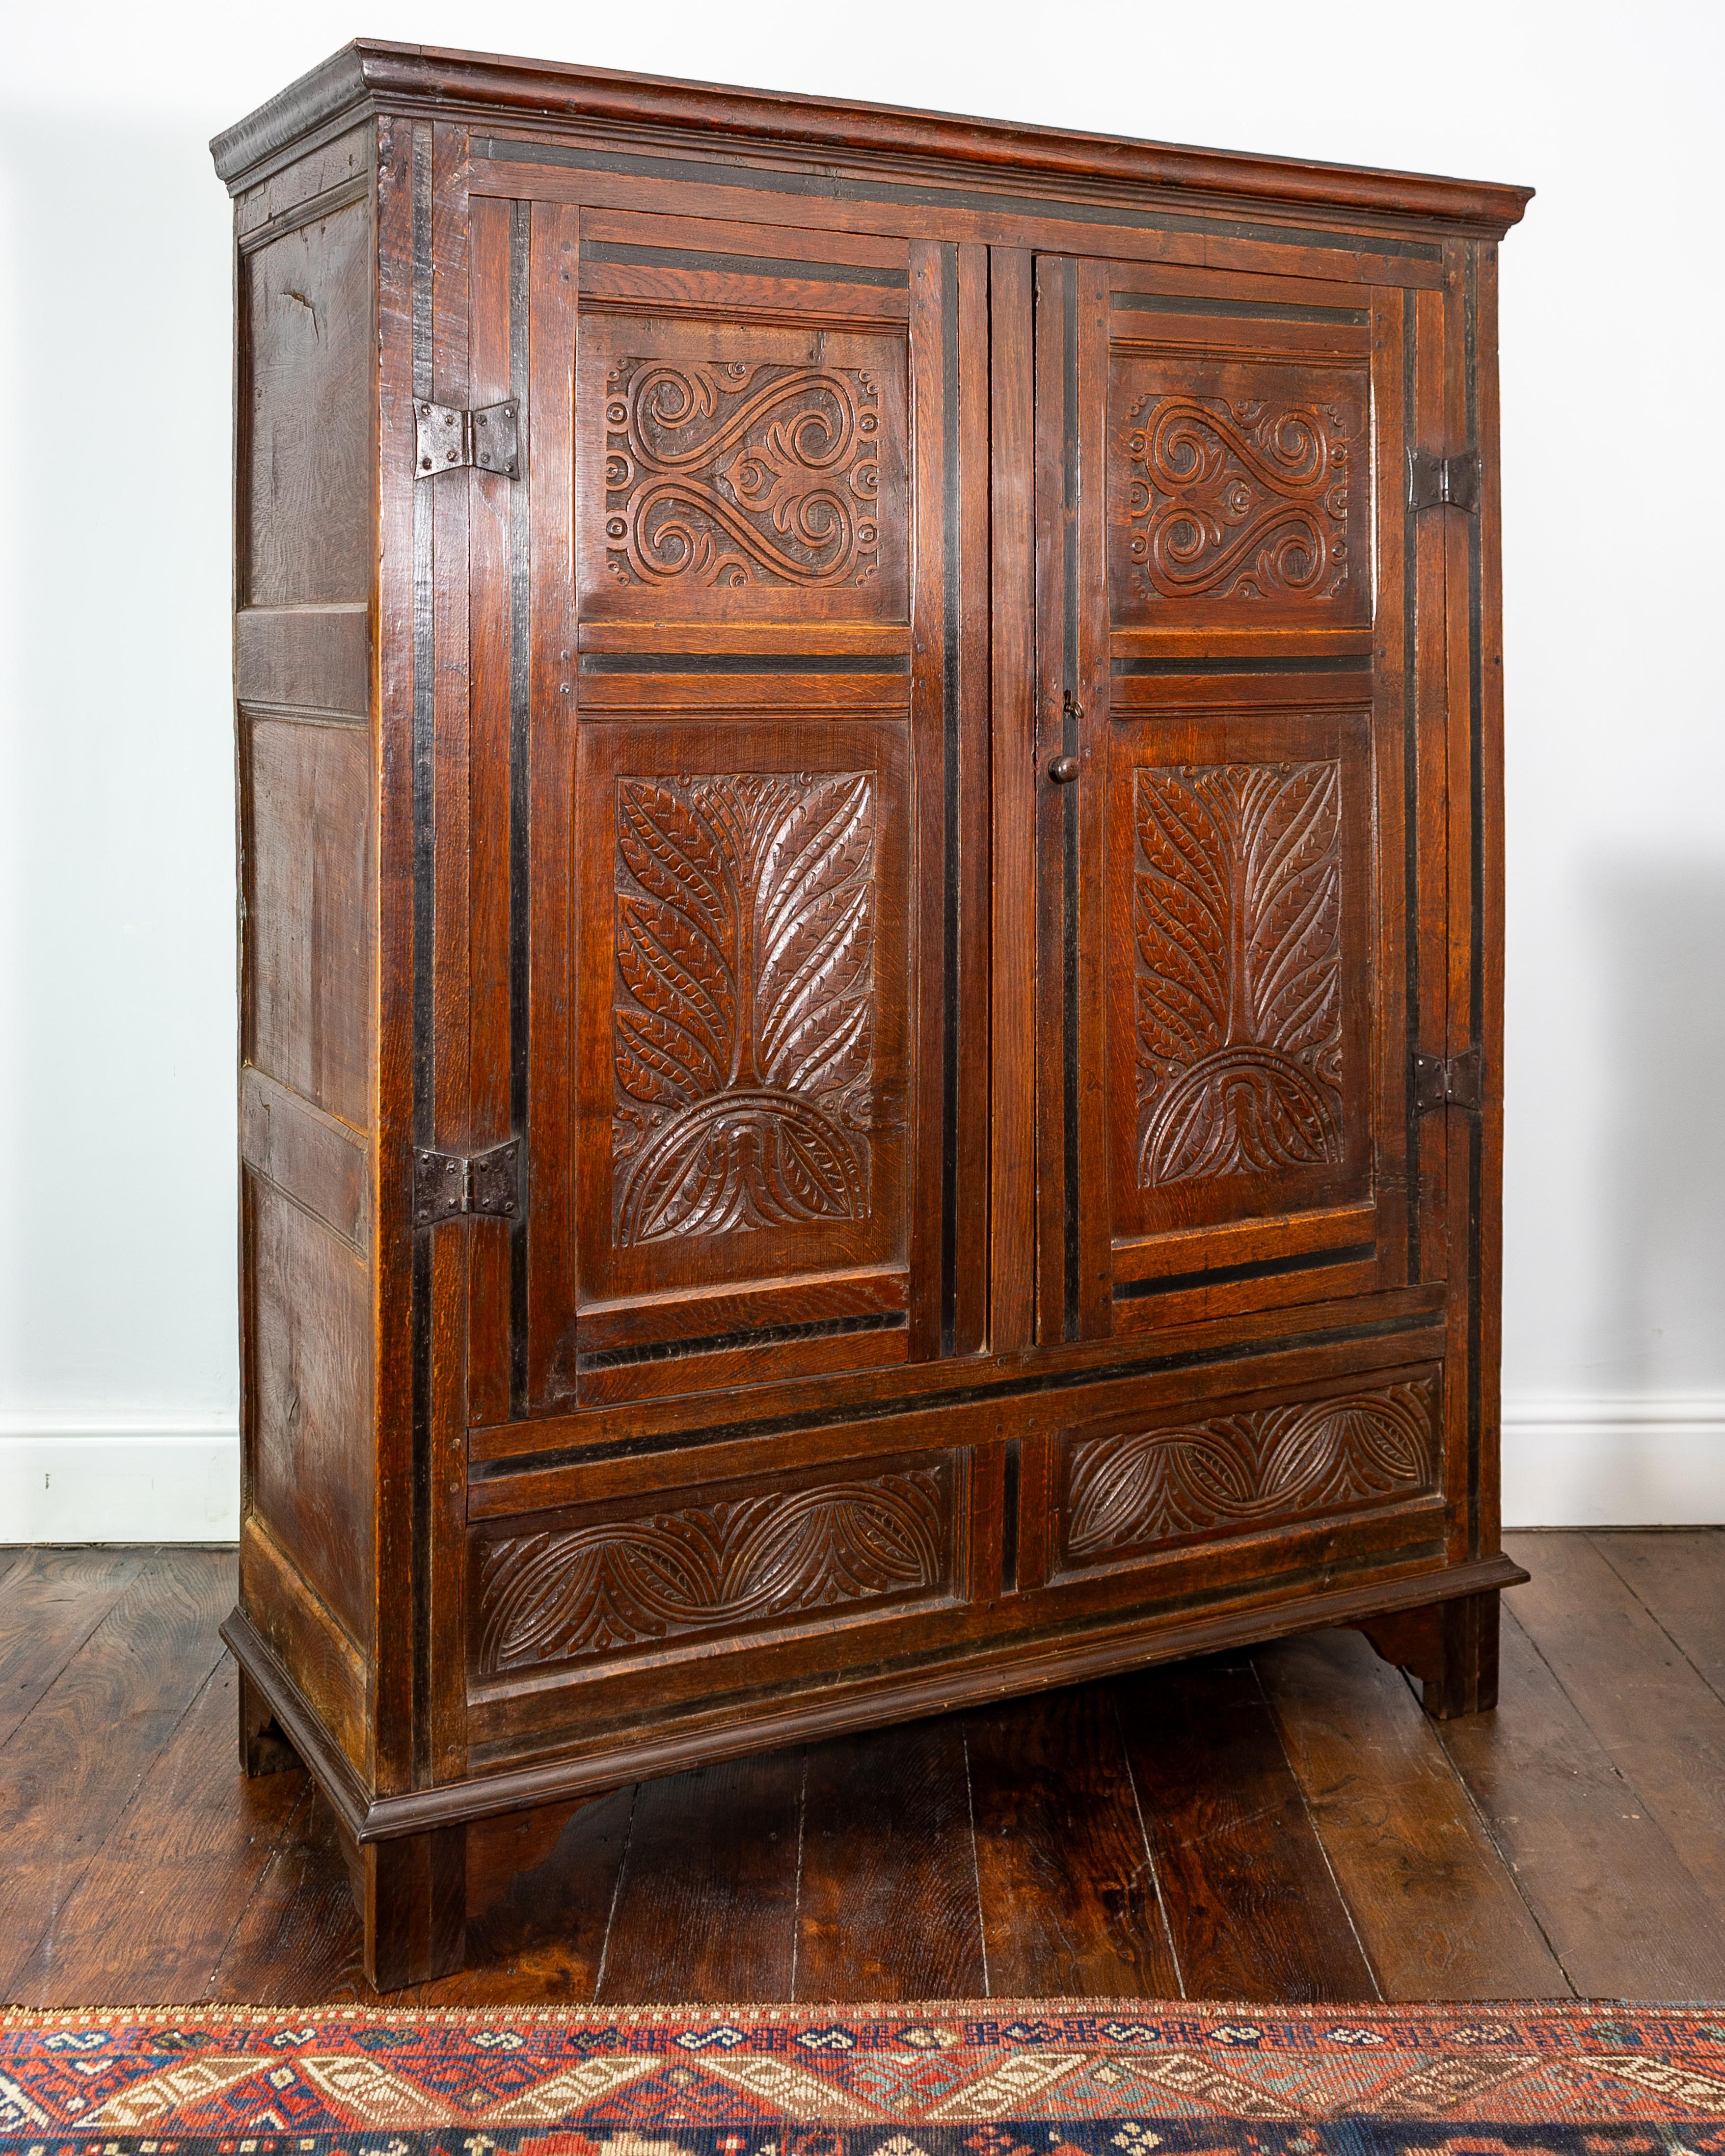 The panelled cabinet with two cupboard doors featuring double S-scroll carved panels, below further carved panels with large lunettes and stylised leafage, with original iron butterfly hinges flanking either side, stained black flat run-moulded